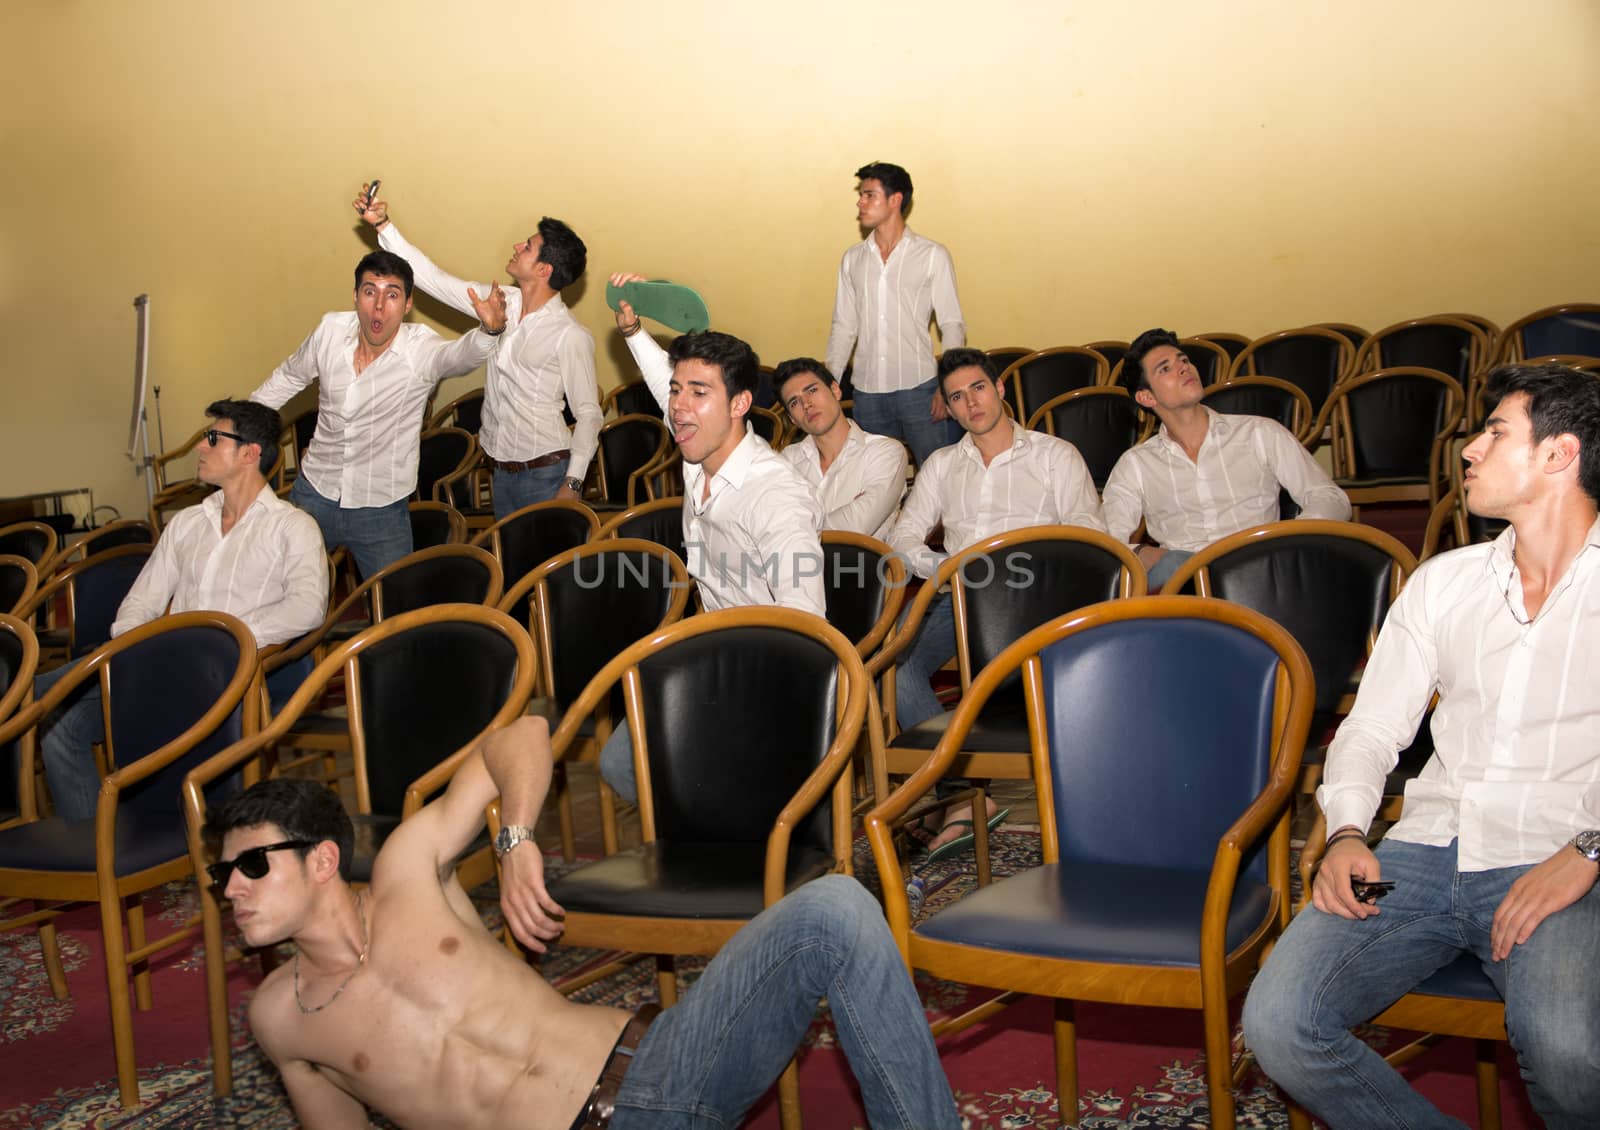 Multiple postures of a handsome young man in a hall or auditorium sitting in various positions in comfortable armchairs, standing and lounging shirtless on the floor